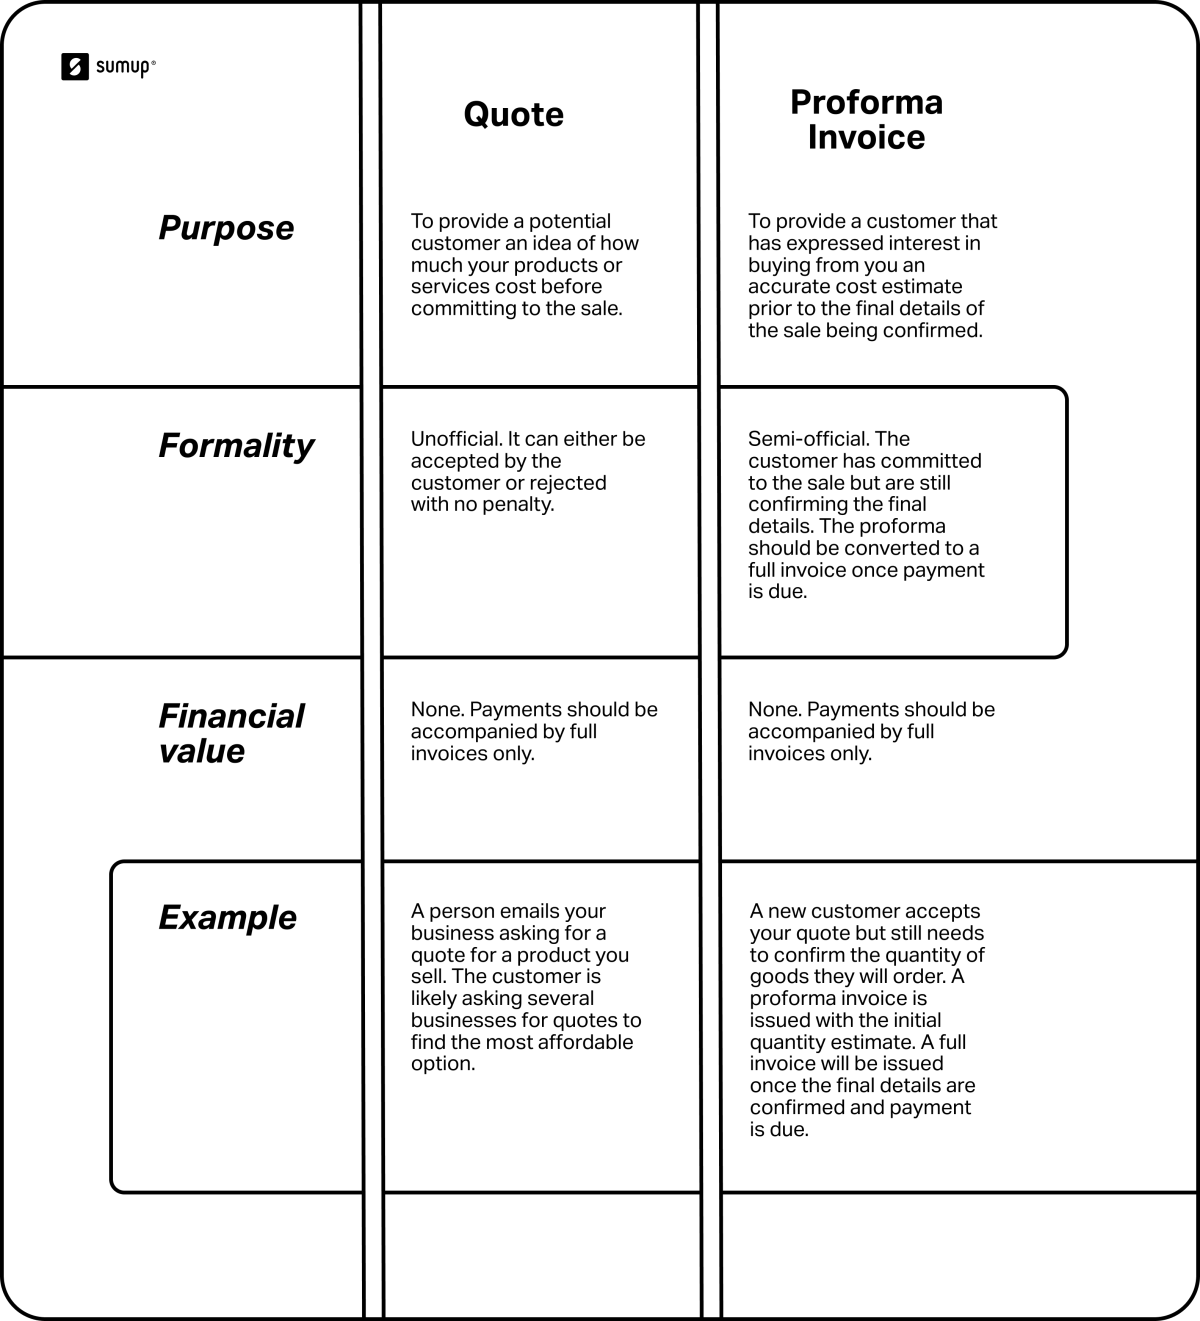 A chart showing the differences between a quote and a proforma invoice in terms of purpose, formality, and financial value.